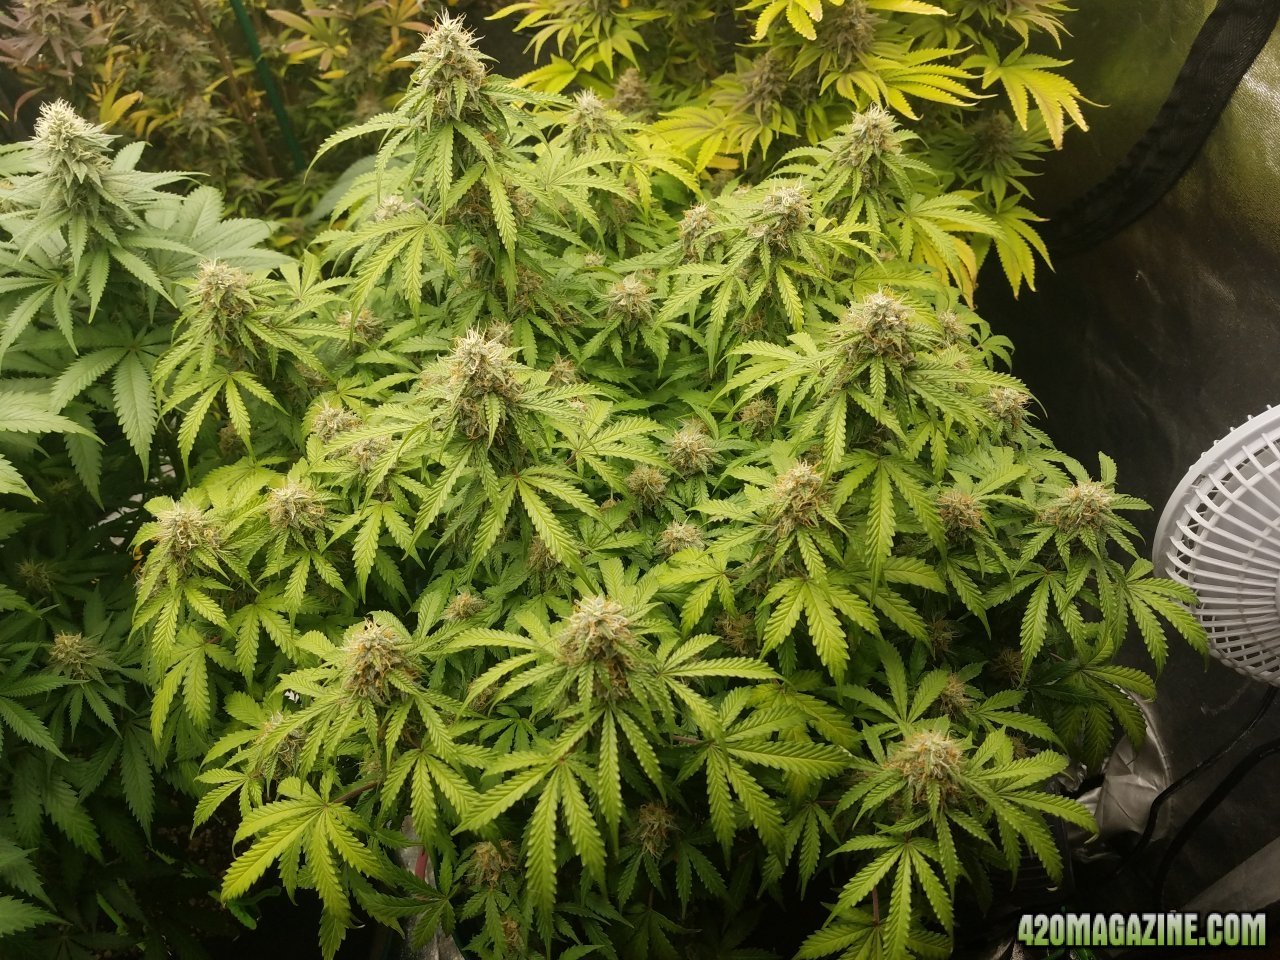 051318 Jack Herer Auto Day 87 Day 38 With Hairs 1.jpg